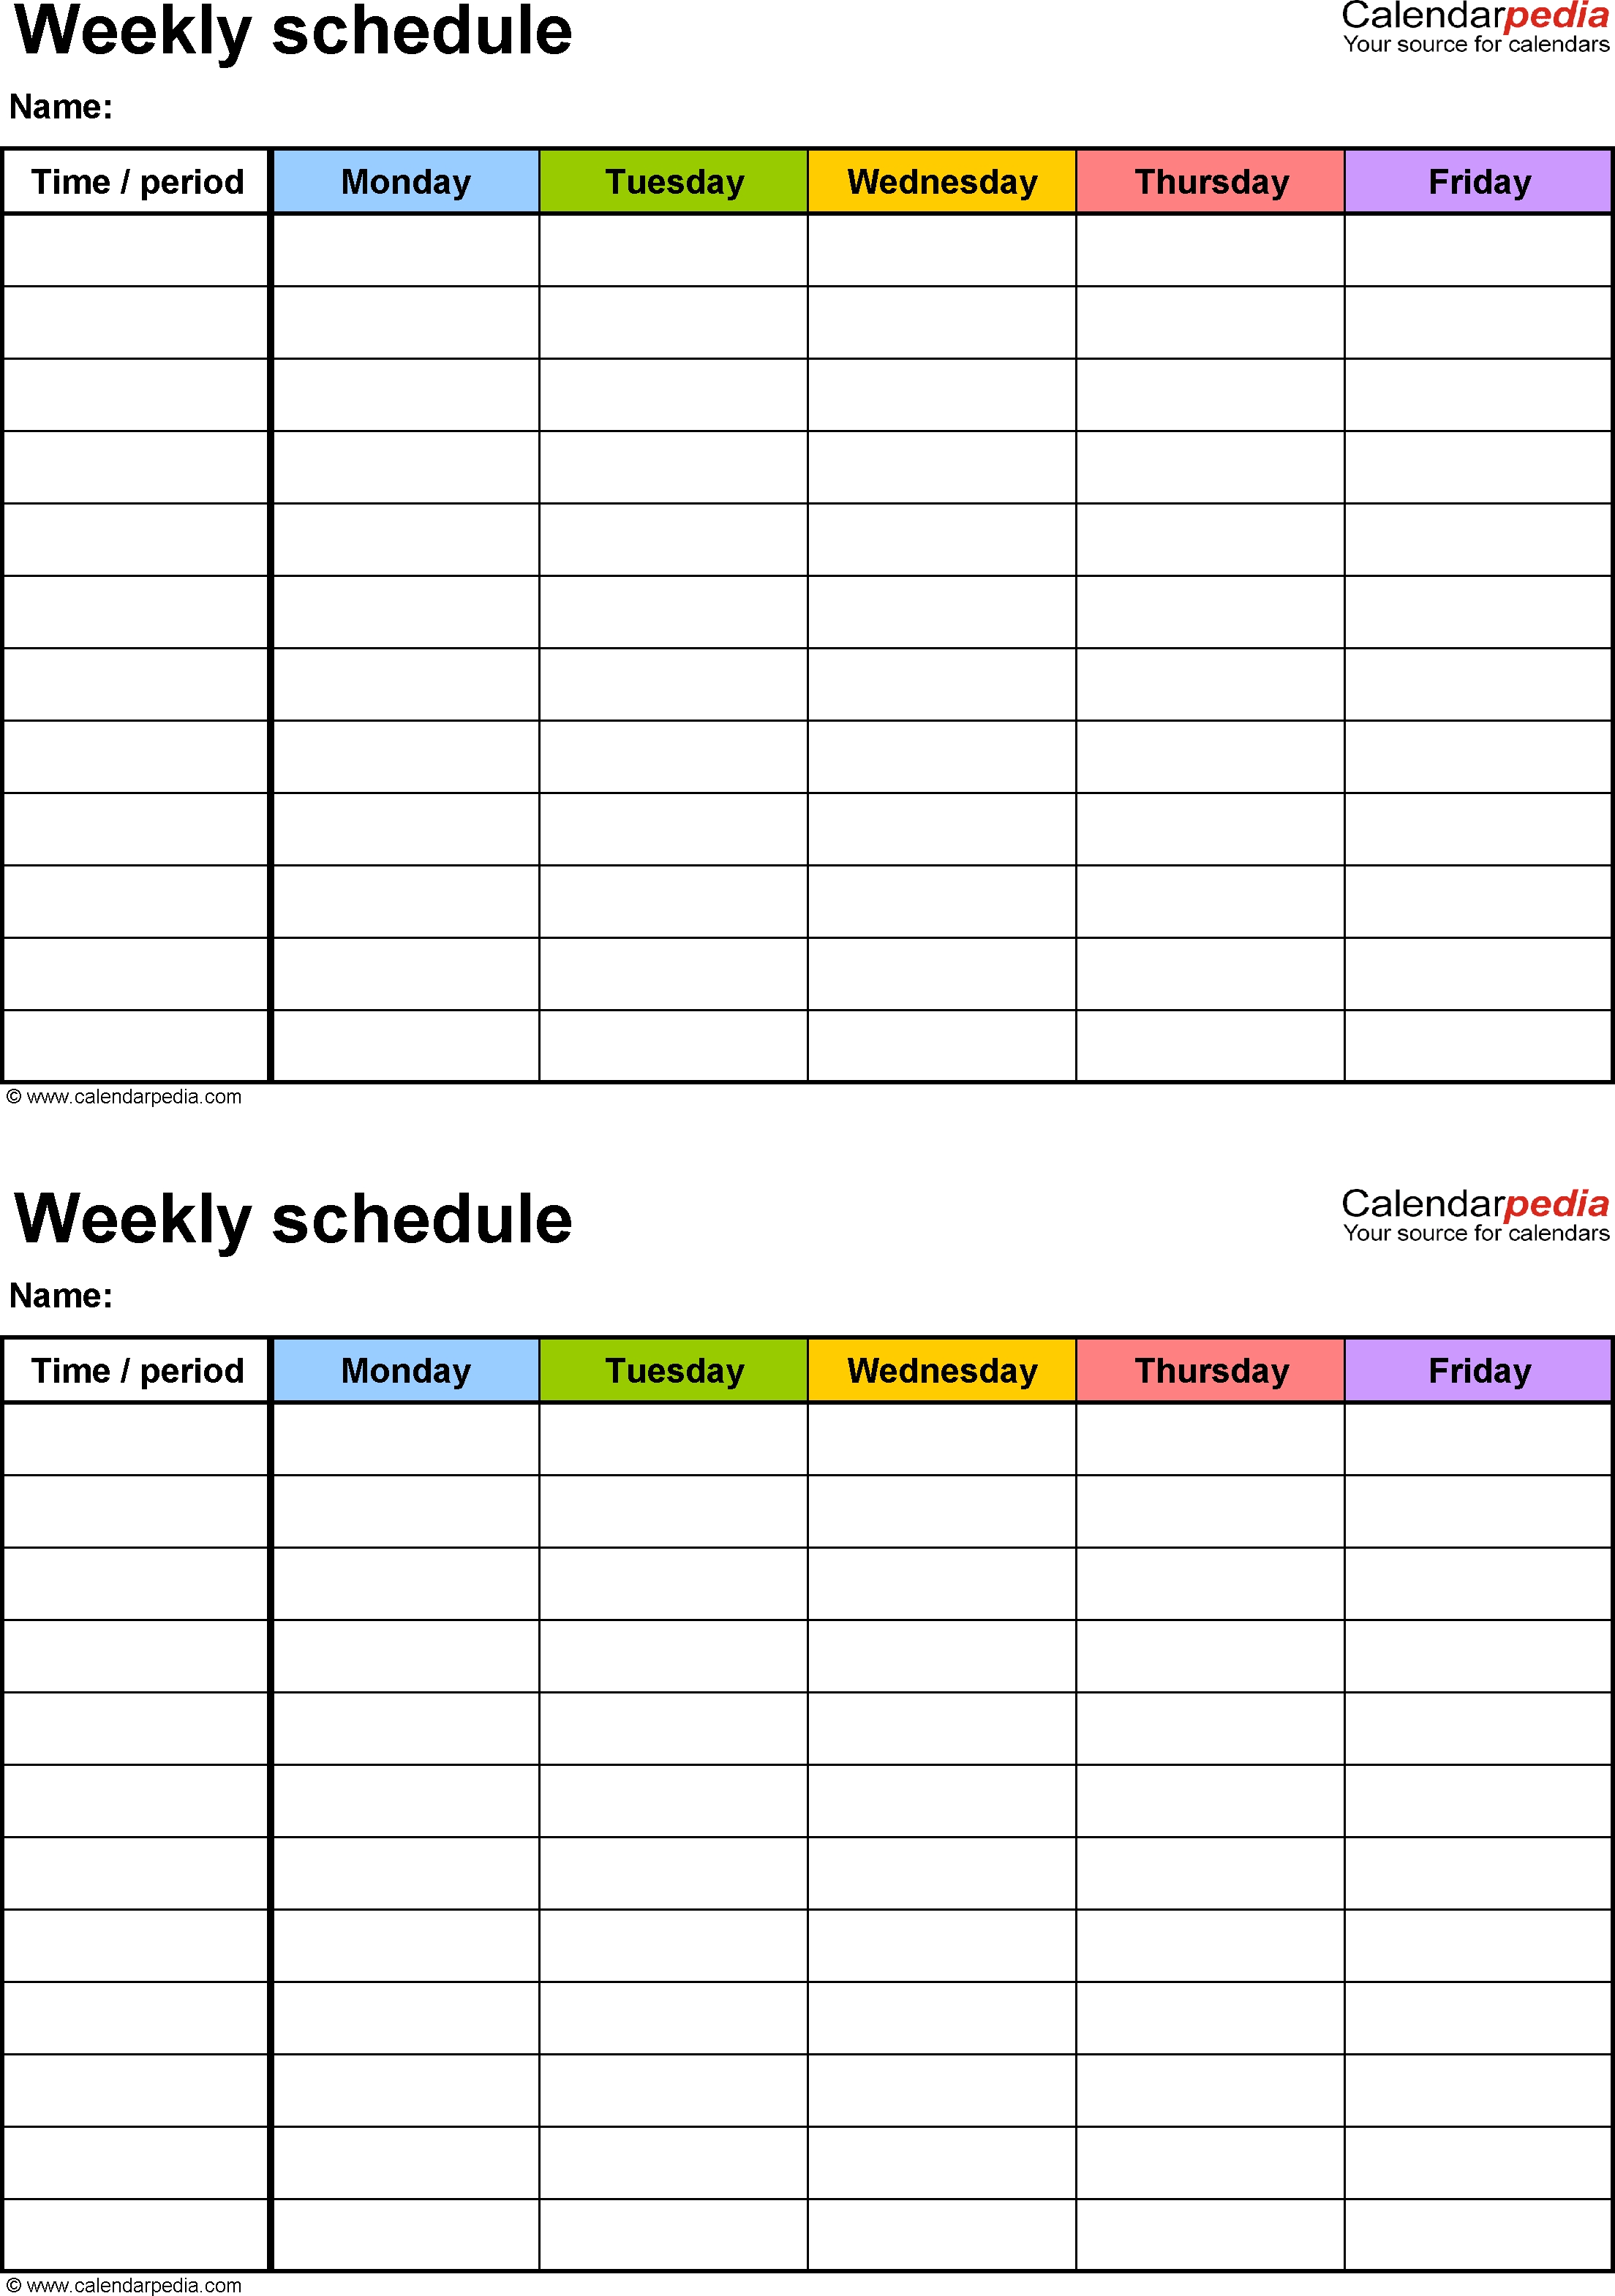 Free Weekly Schedule Templates For Excel - 18 Templates-Monthly Calendar Checklist Excel Template